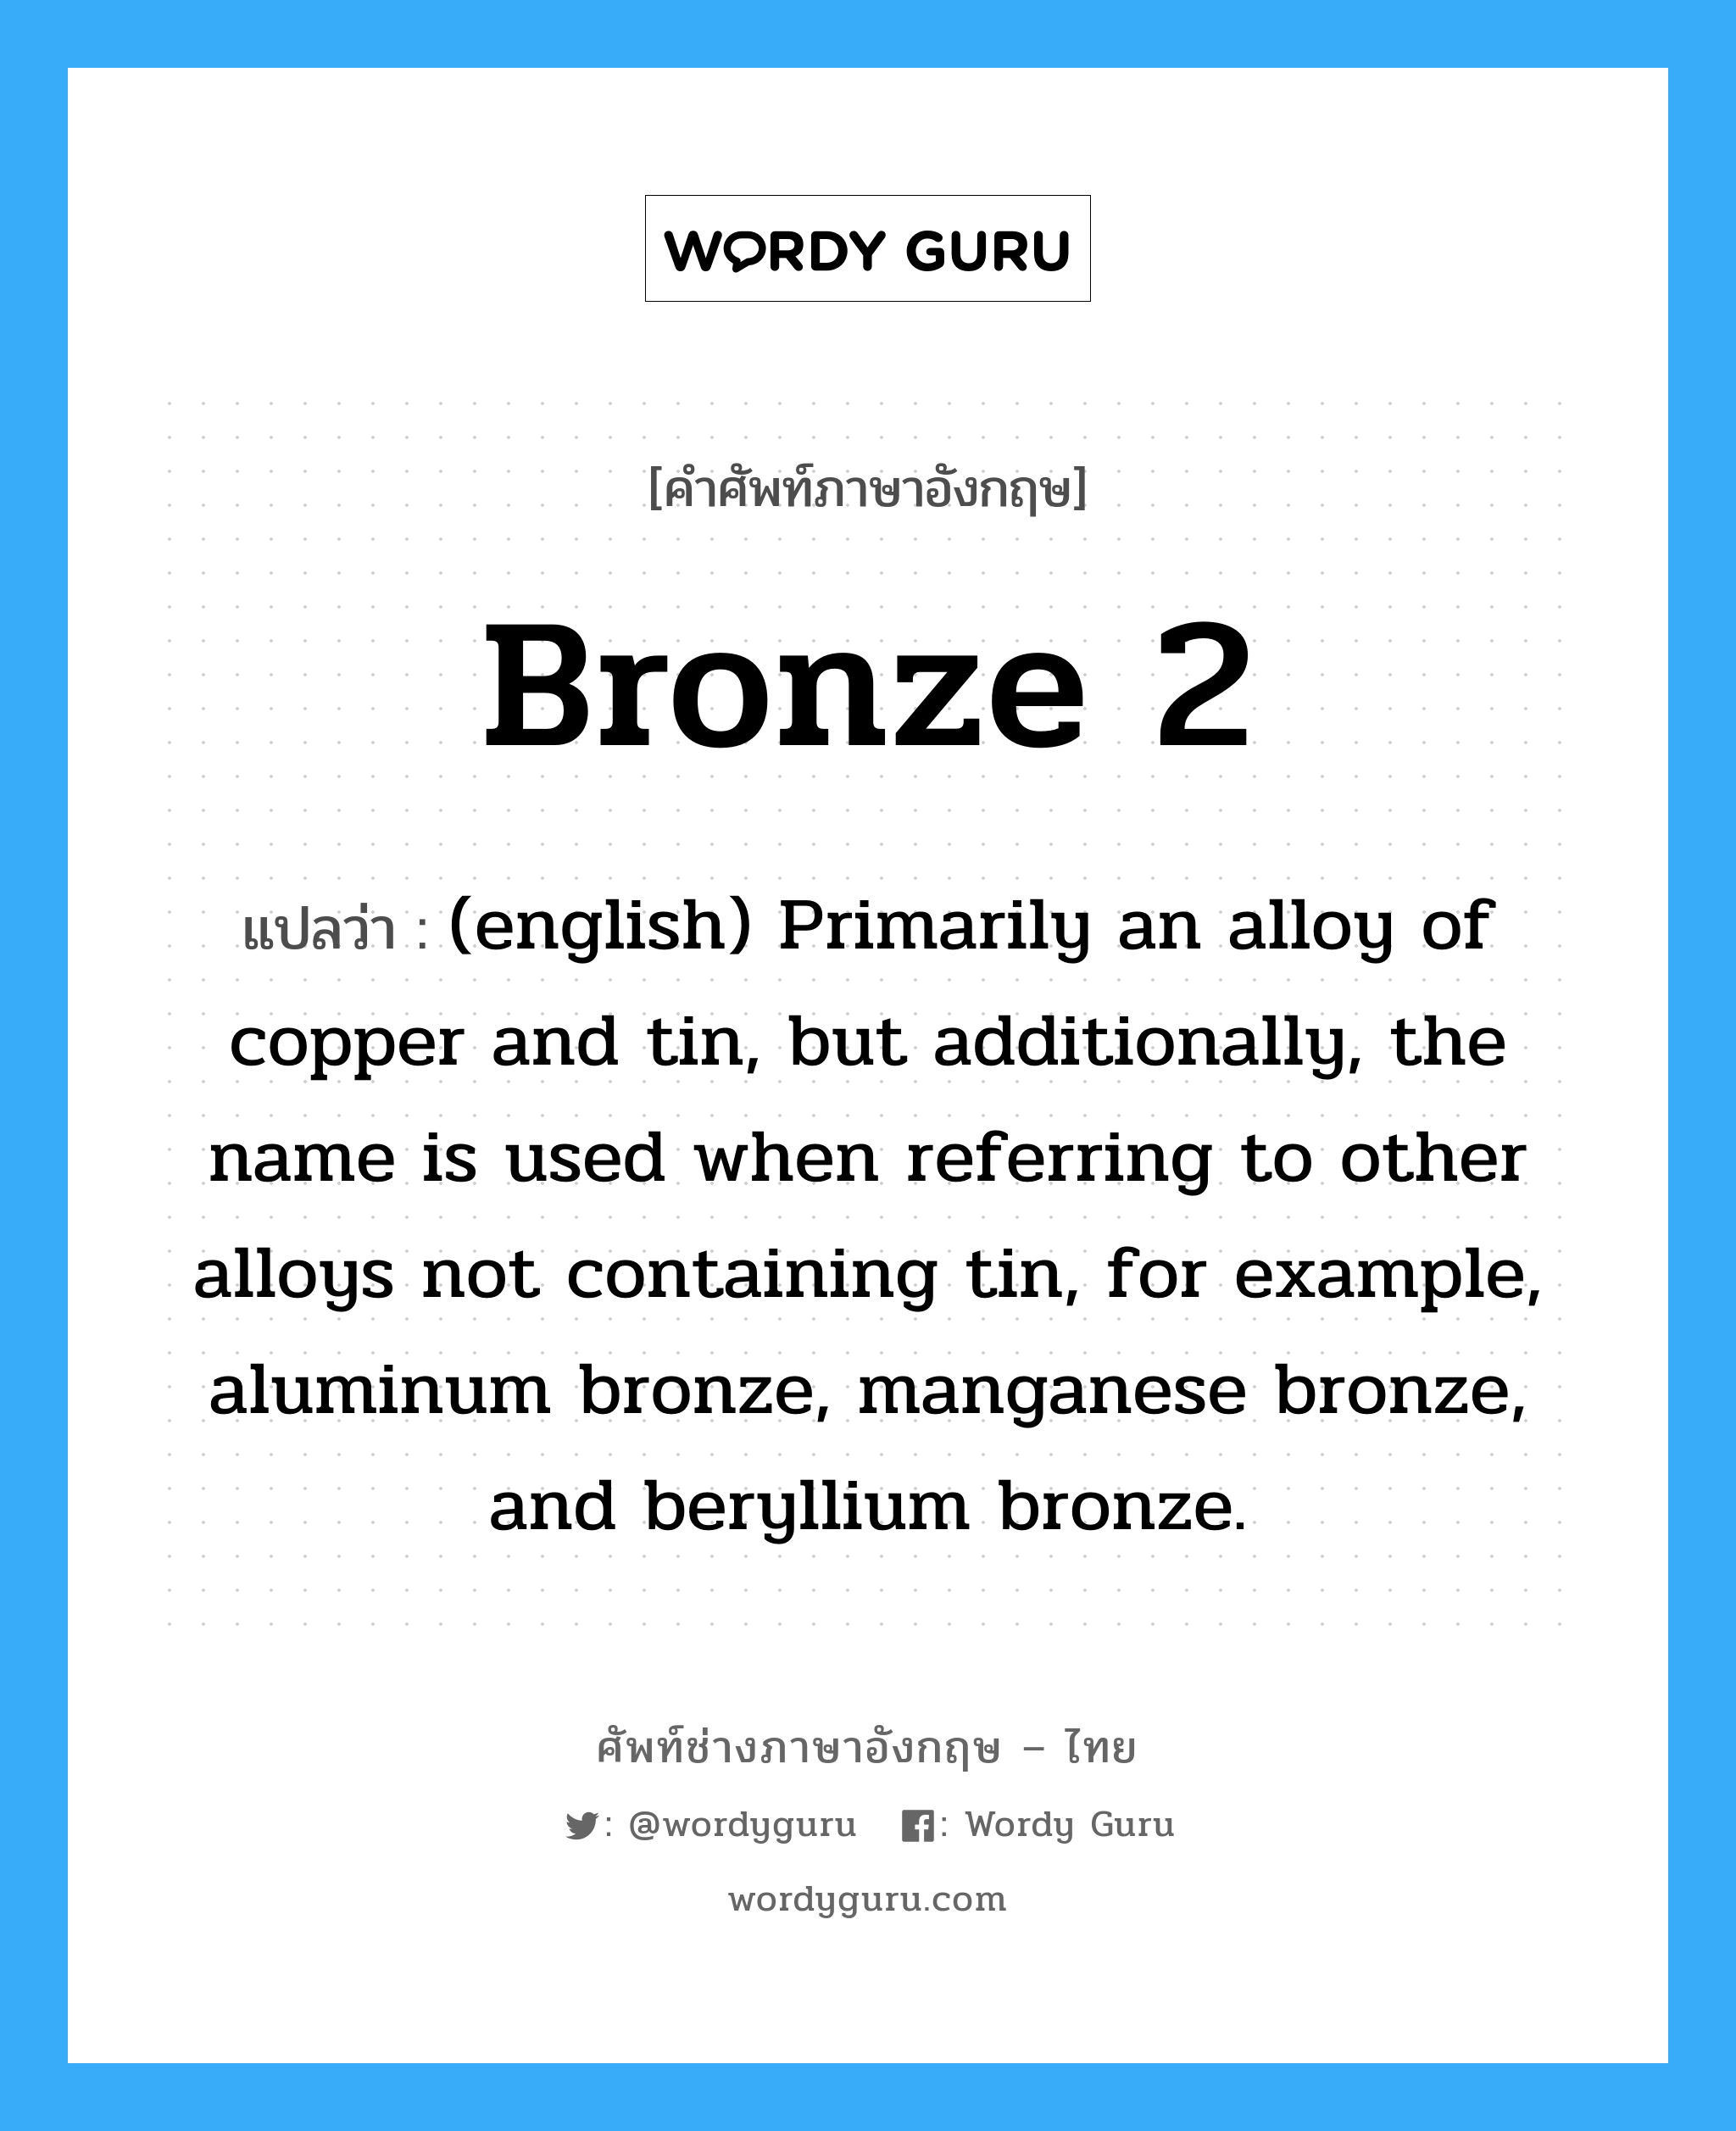 Bronze 2 แปลว่า?, คำศัพท์ช่างภาษาอังกฤษ - ไทย Bronze 2 คำศัพท์ภาษาอังกฤษ Bronze 2 แปลว่า (english) Primarily an alloy of copper and tin, but additionally, the name is used when referring to other alloys not containing tin, for example, aluminum bronze, manganese bronze, and beryllium bronze.